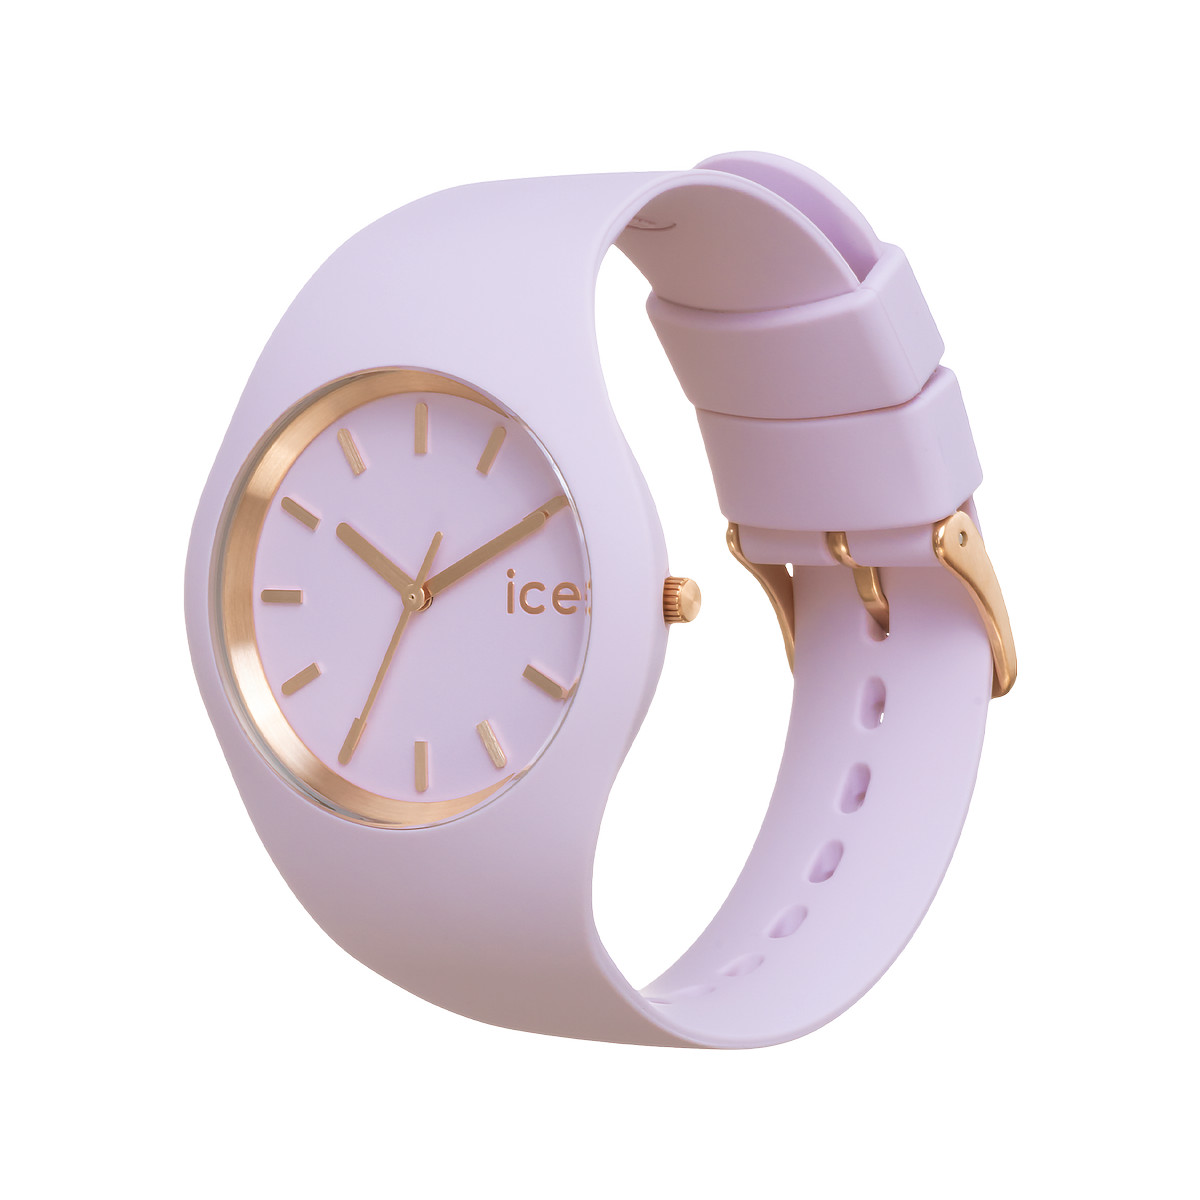 Montre Ice Watch Femme silicone rose - vue 2